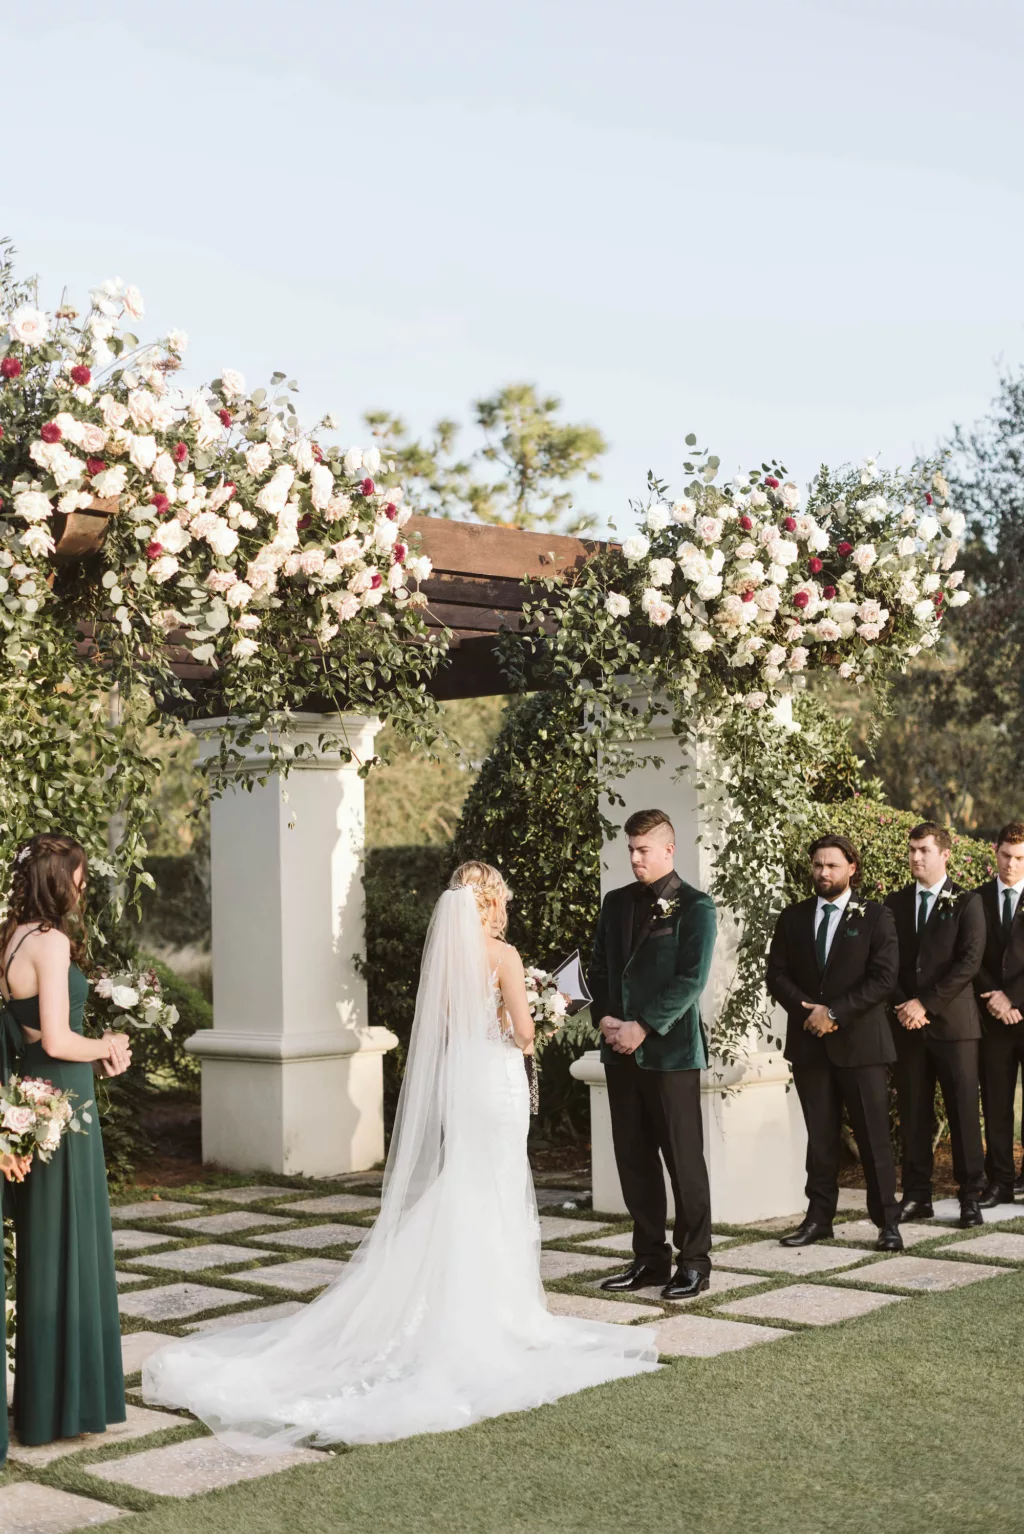 Luxurious Emerald Green Outdoor Wedding Ceremony on the Event Lawn | Pergola with White Roses, Purple Chrysanthemums, and Cascading Greenery Decor Inspiration | Tampa Bay Venue The Concession Golf Club | Florist Bruce Wayne Florals